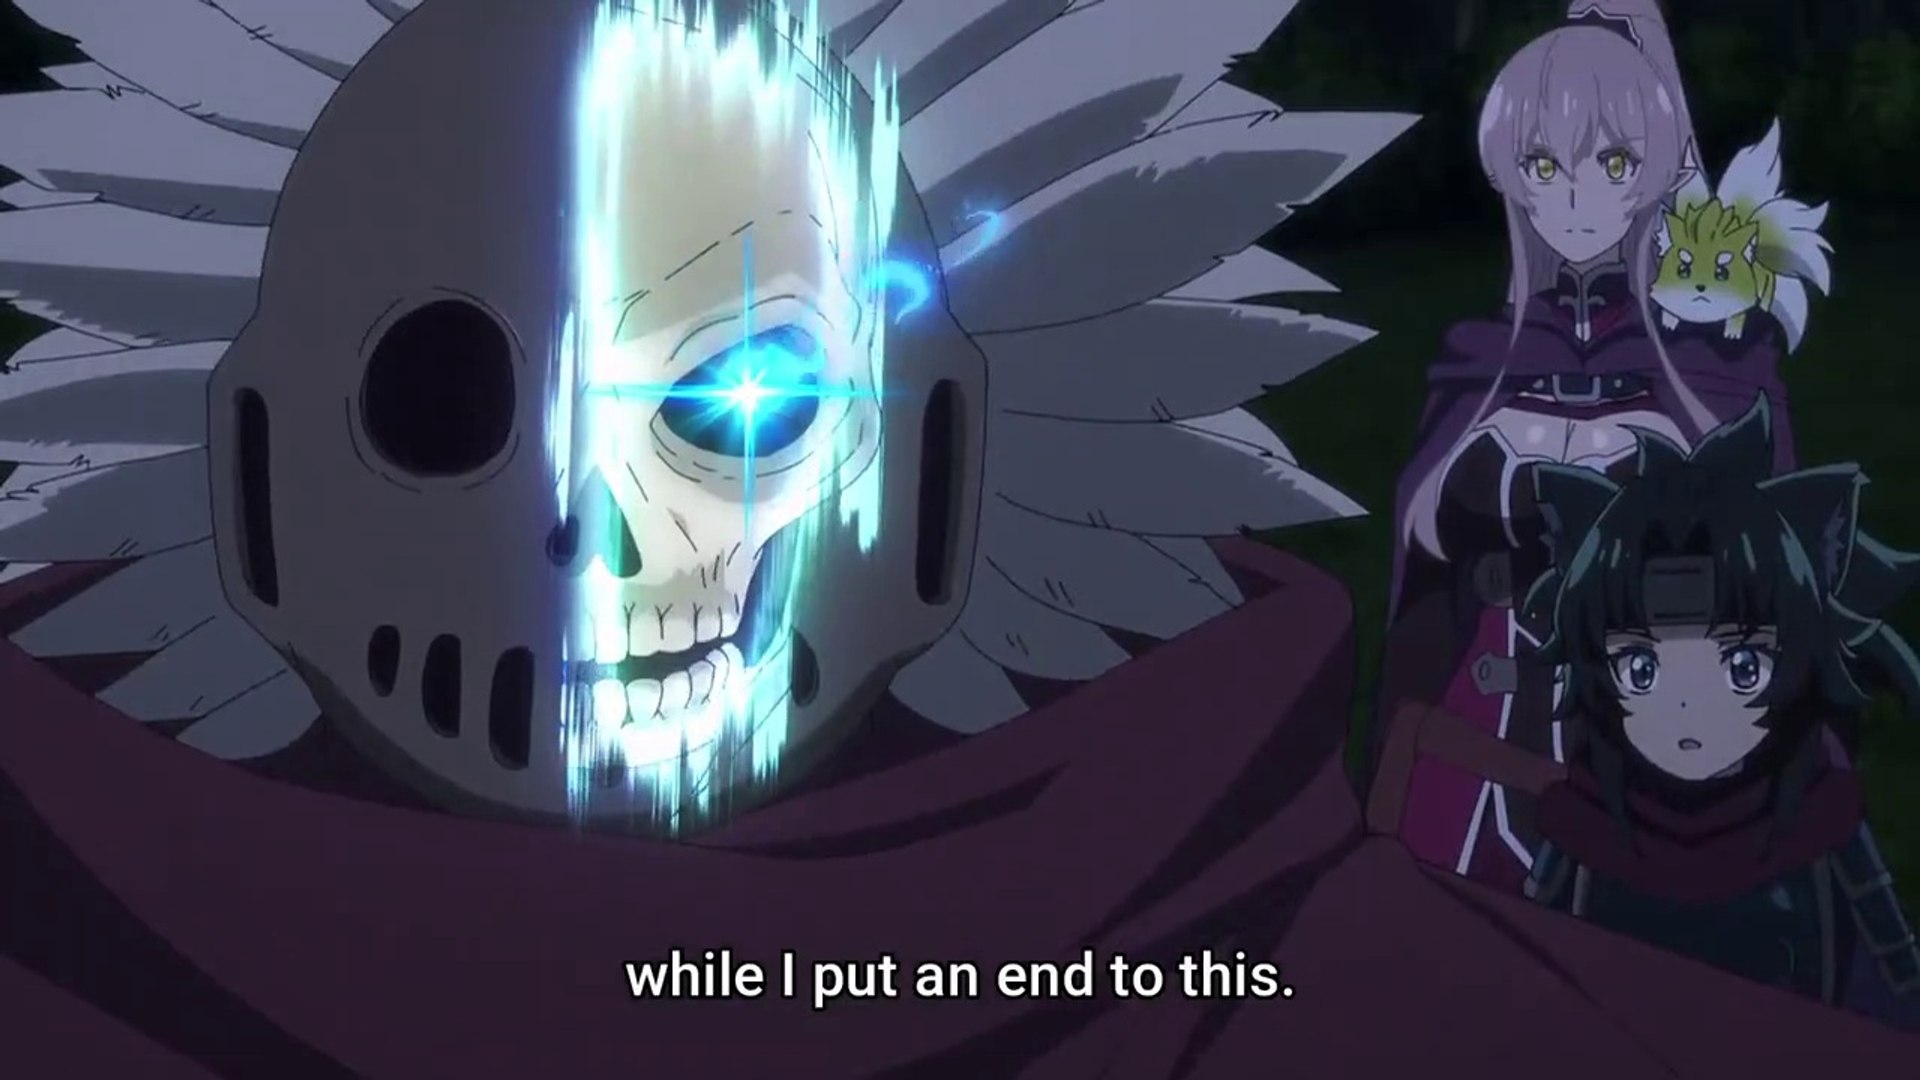 Skeleton Knight in Another World - EP 8 English Subbed - video